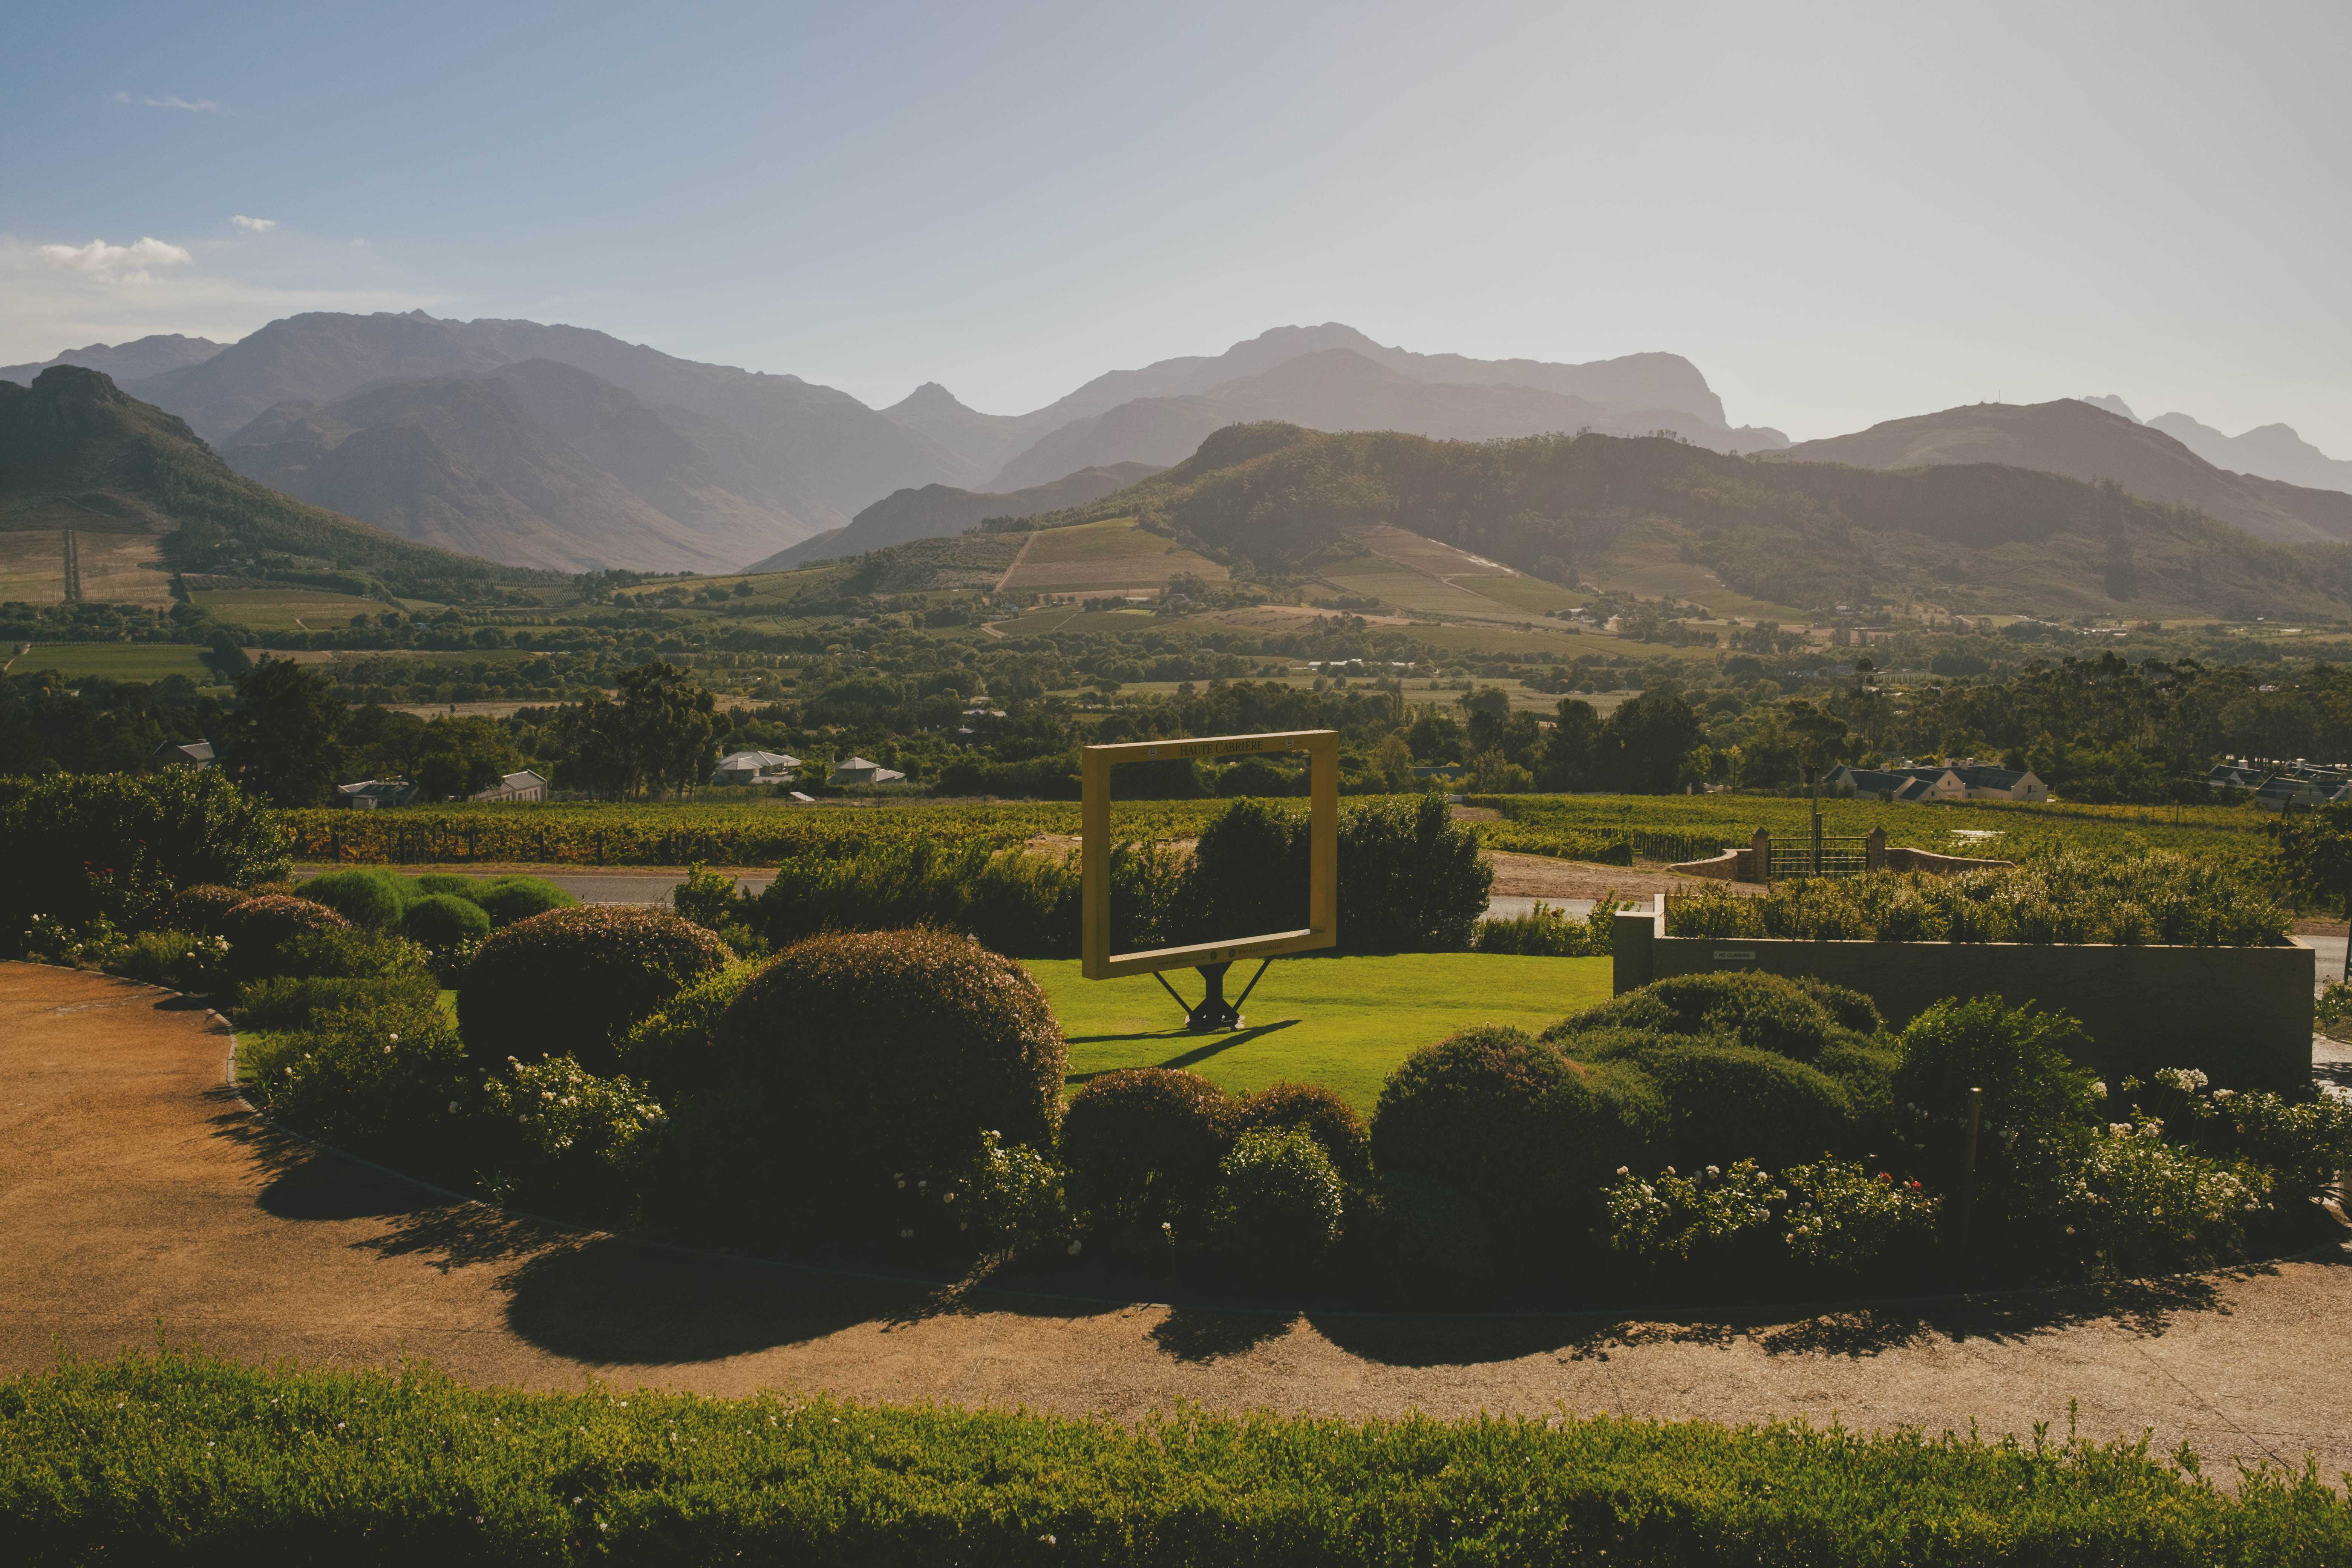 The Franschhoek valley in the evening sun